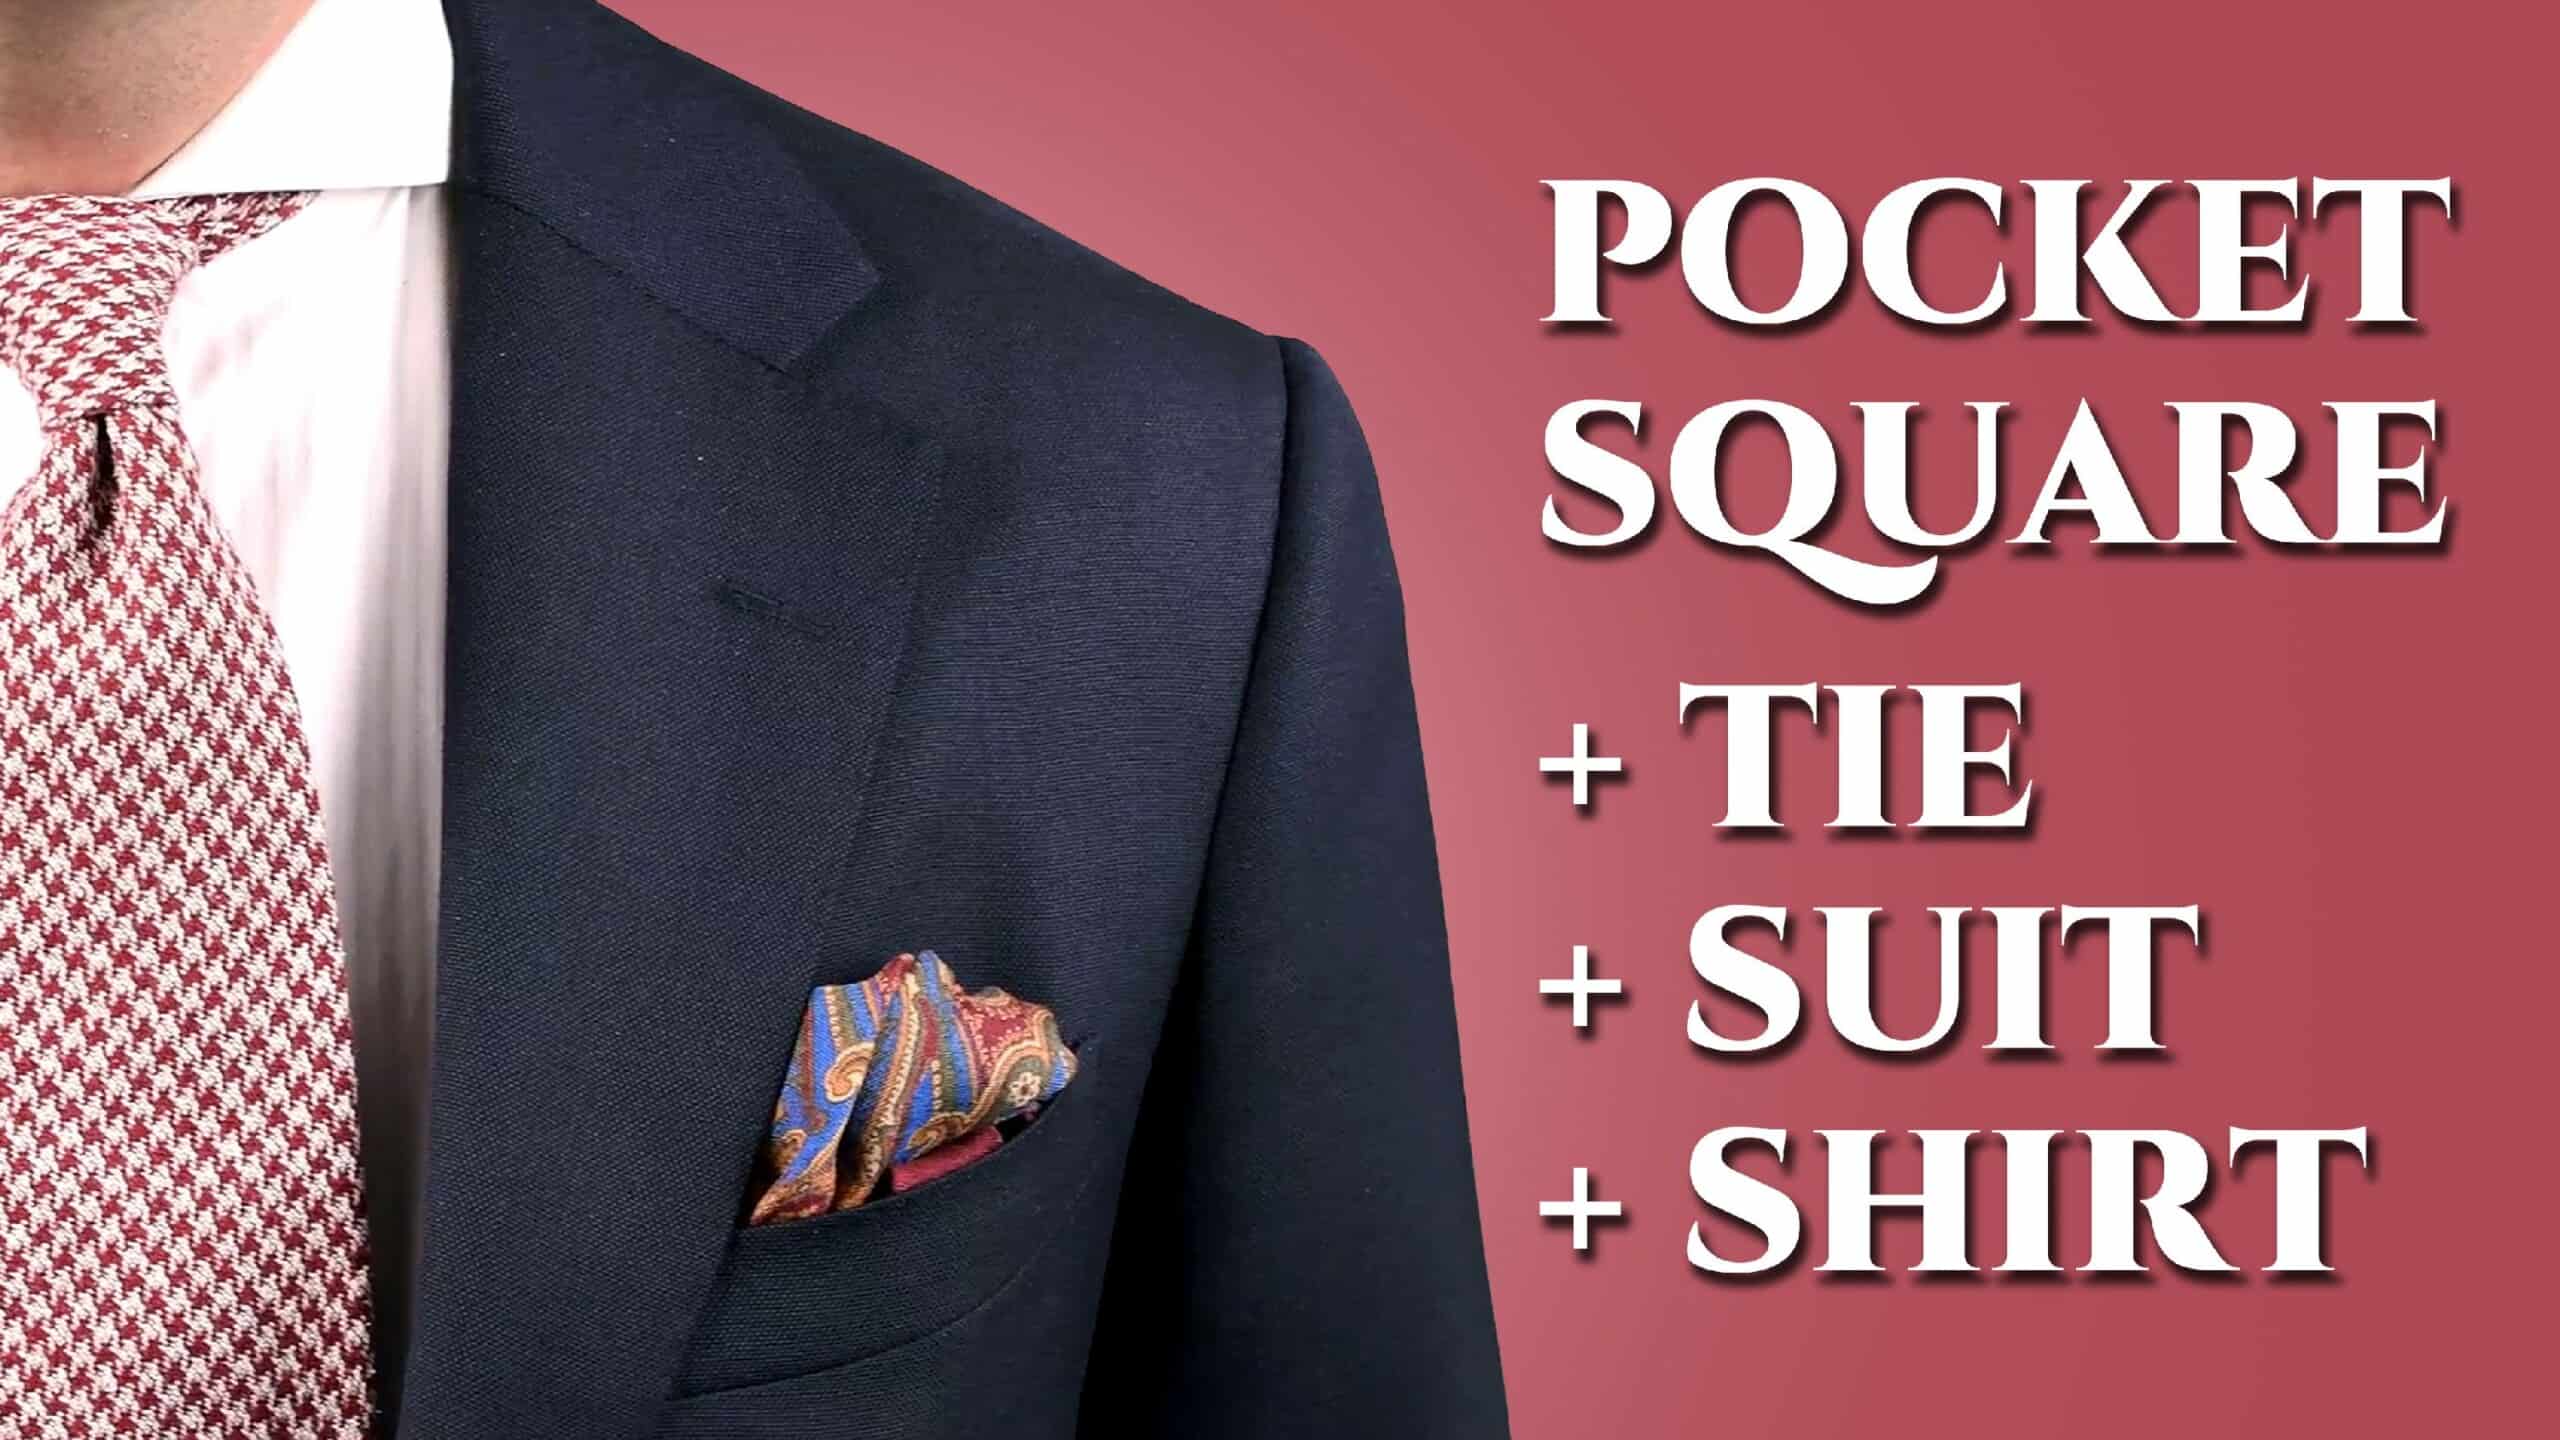 How To Combine A Pocket Square With A Tie, Suit & Shirt